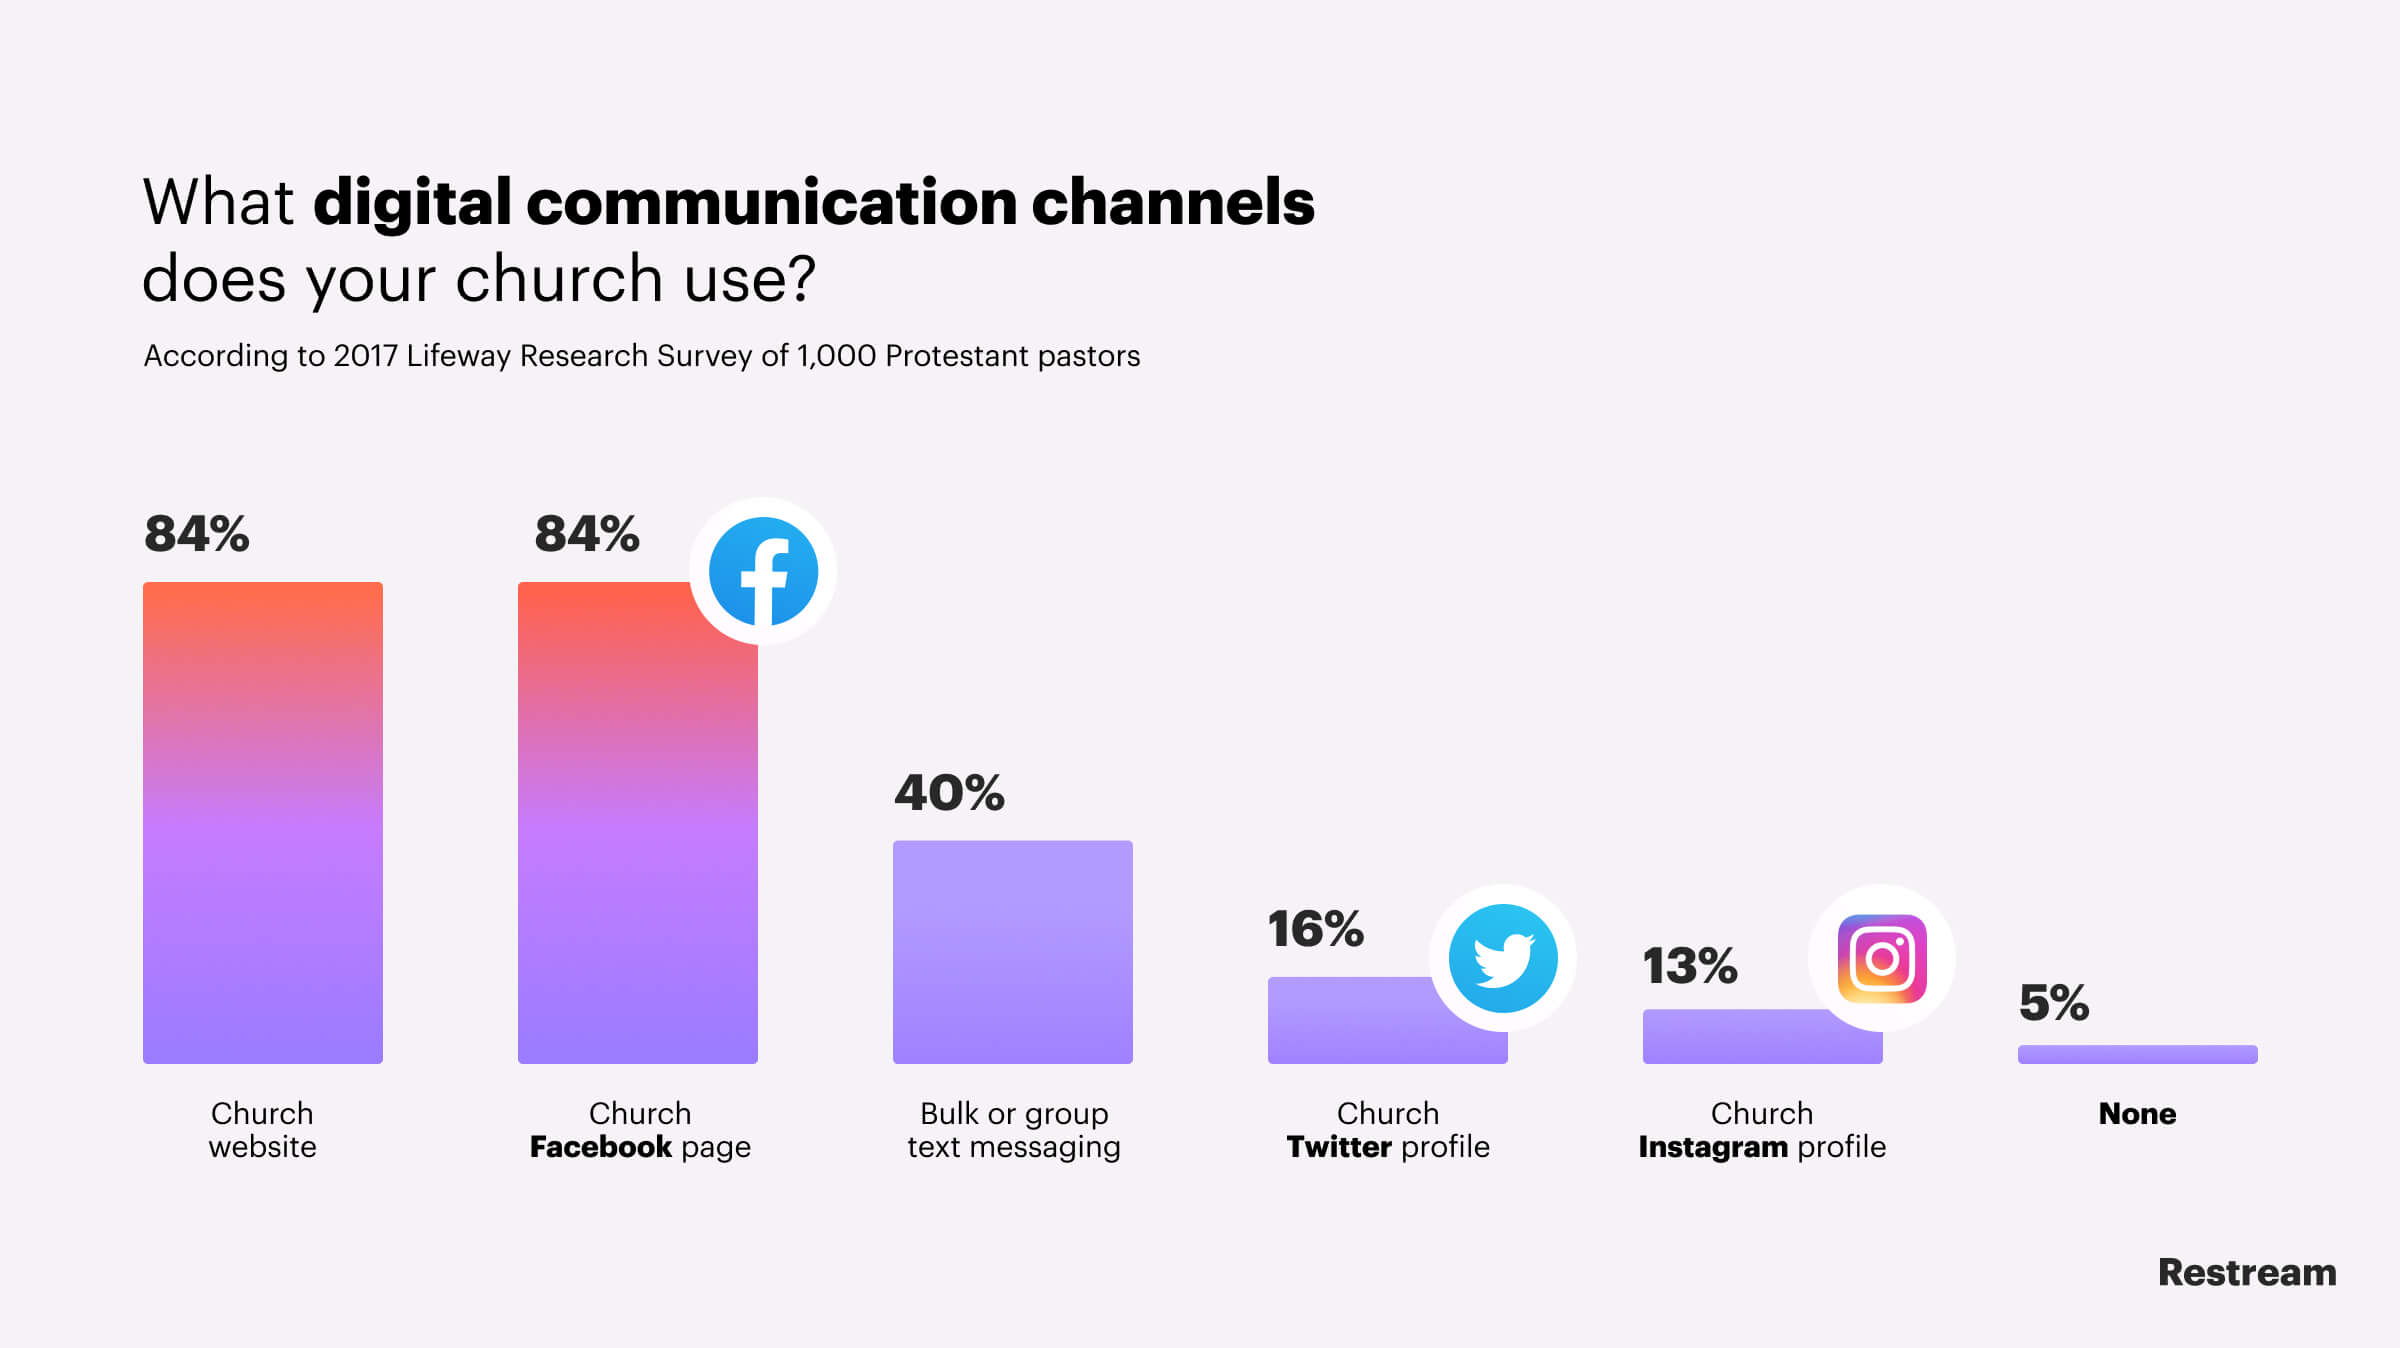 What digital communication channels does your church use?